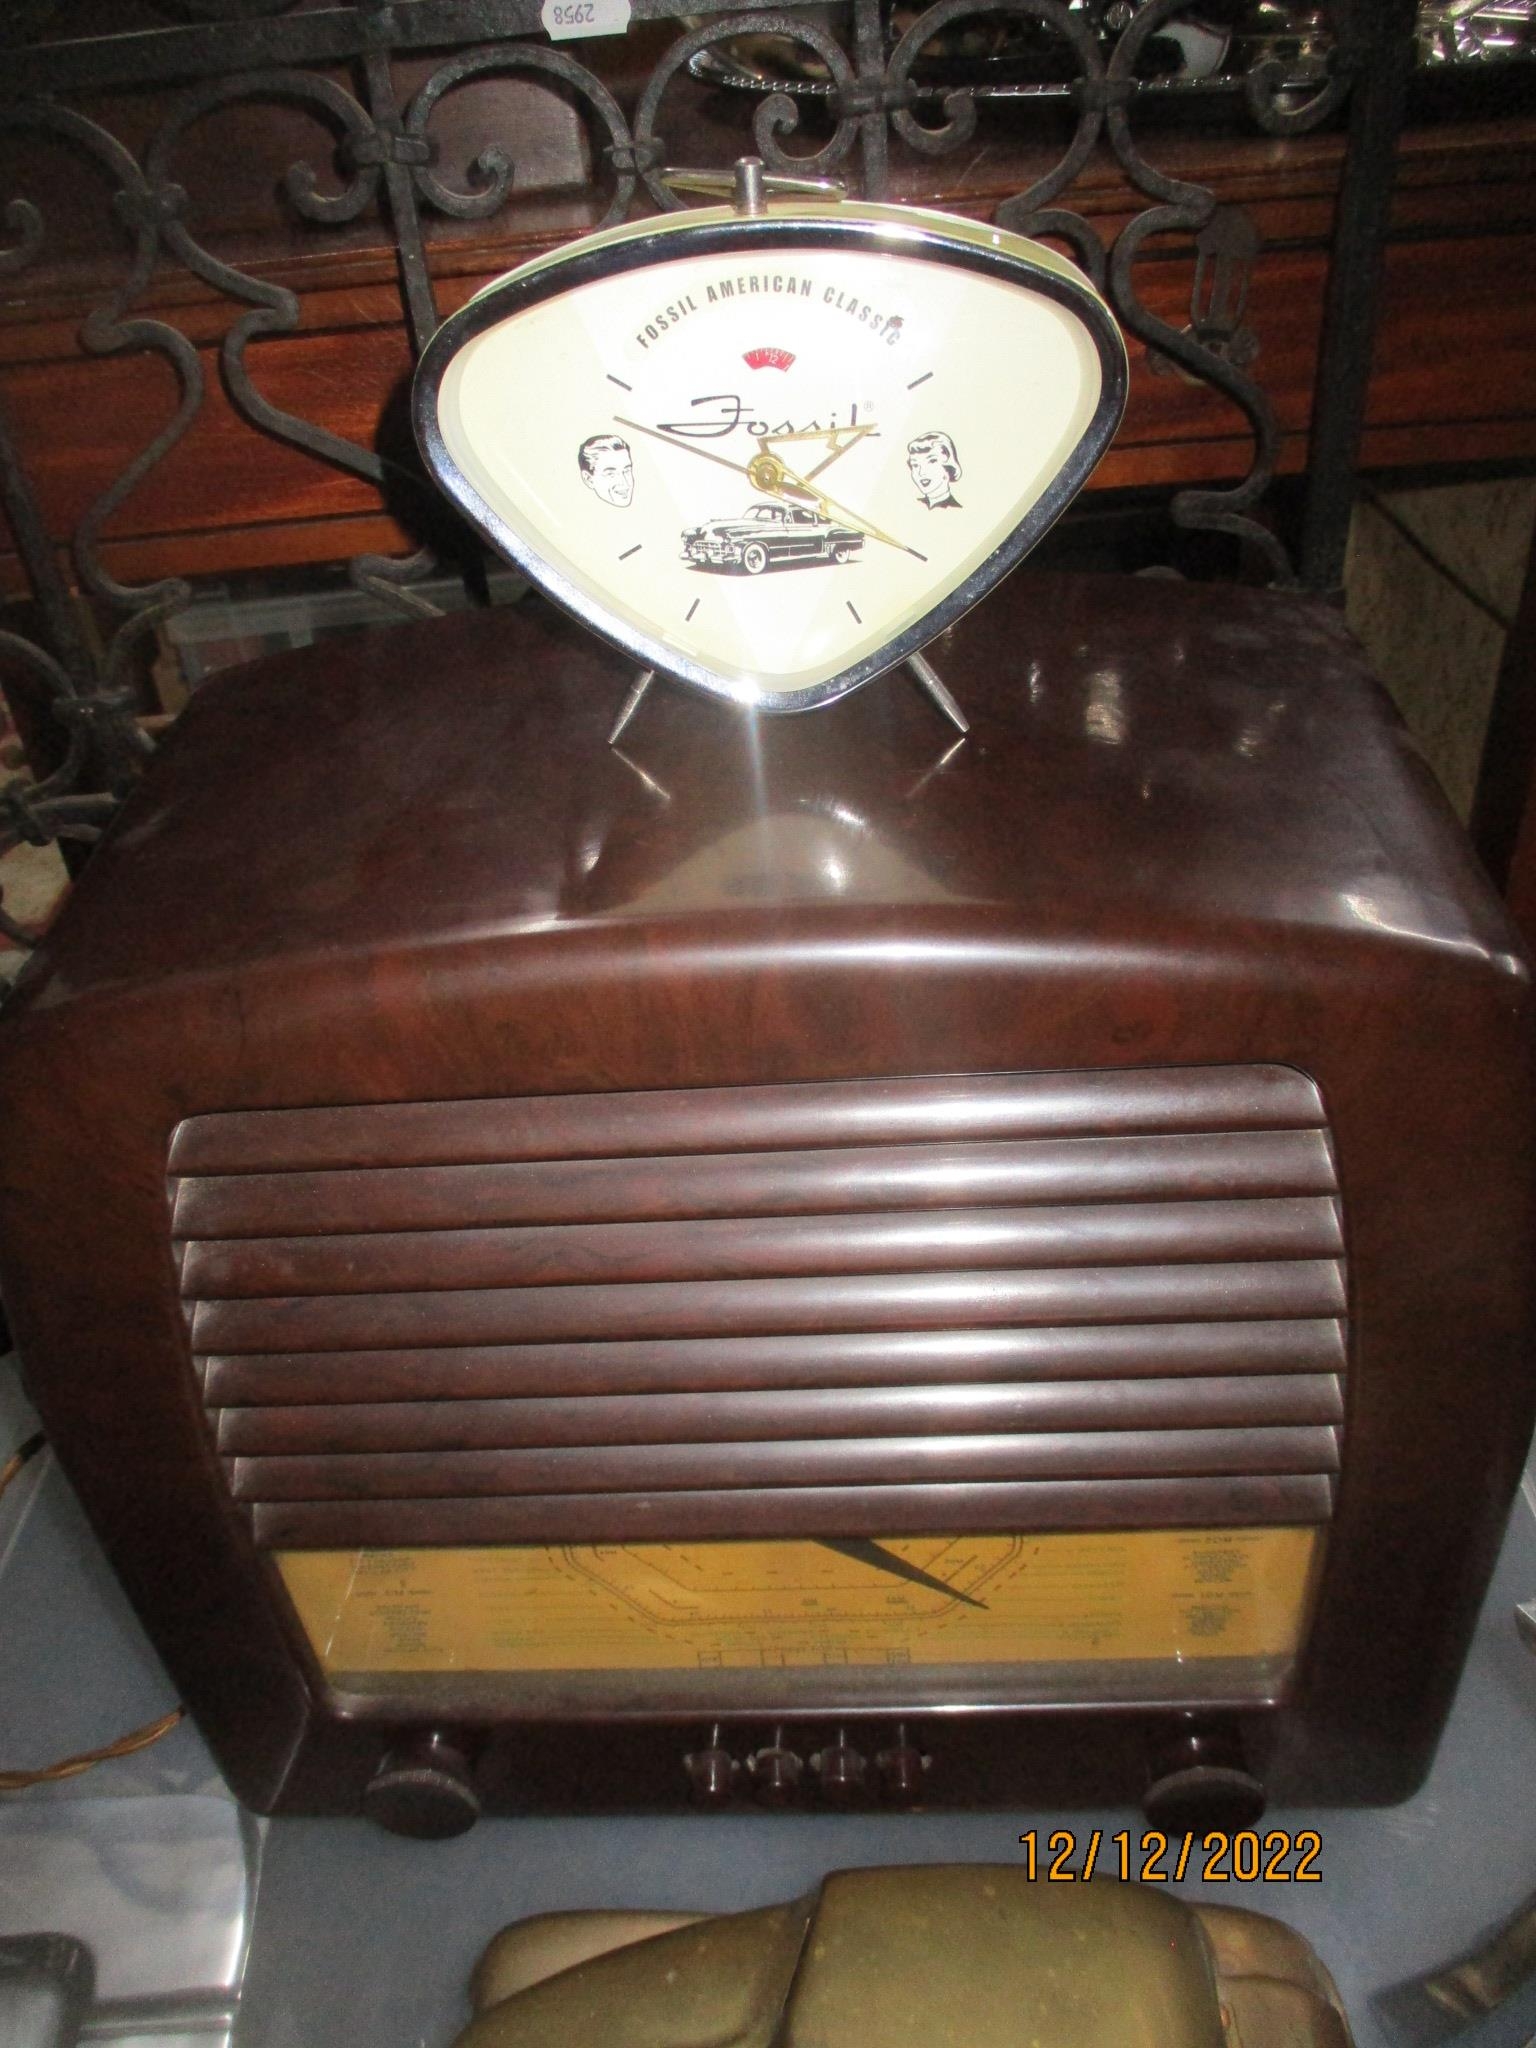 A General Electric Company (GEC) Bakelite cased radio, a Fossil American classic alarm clock, - Image 6 of 8